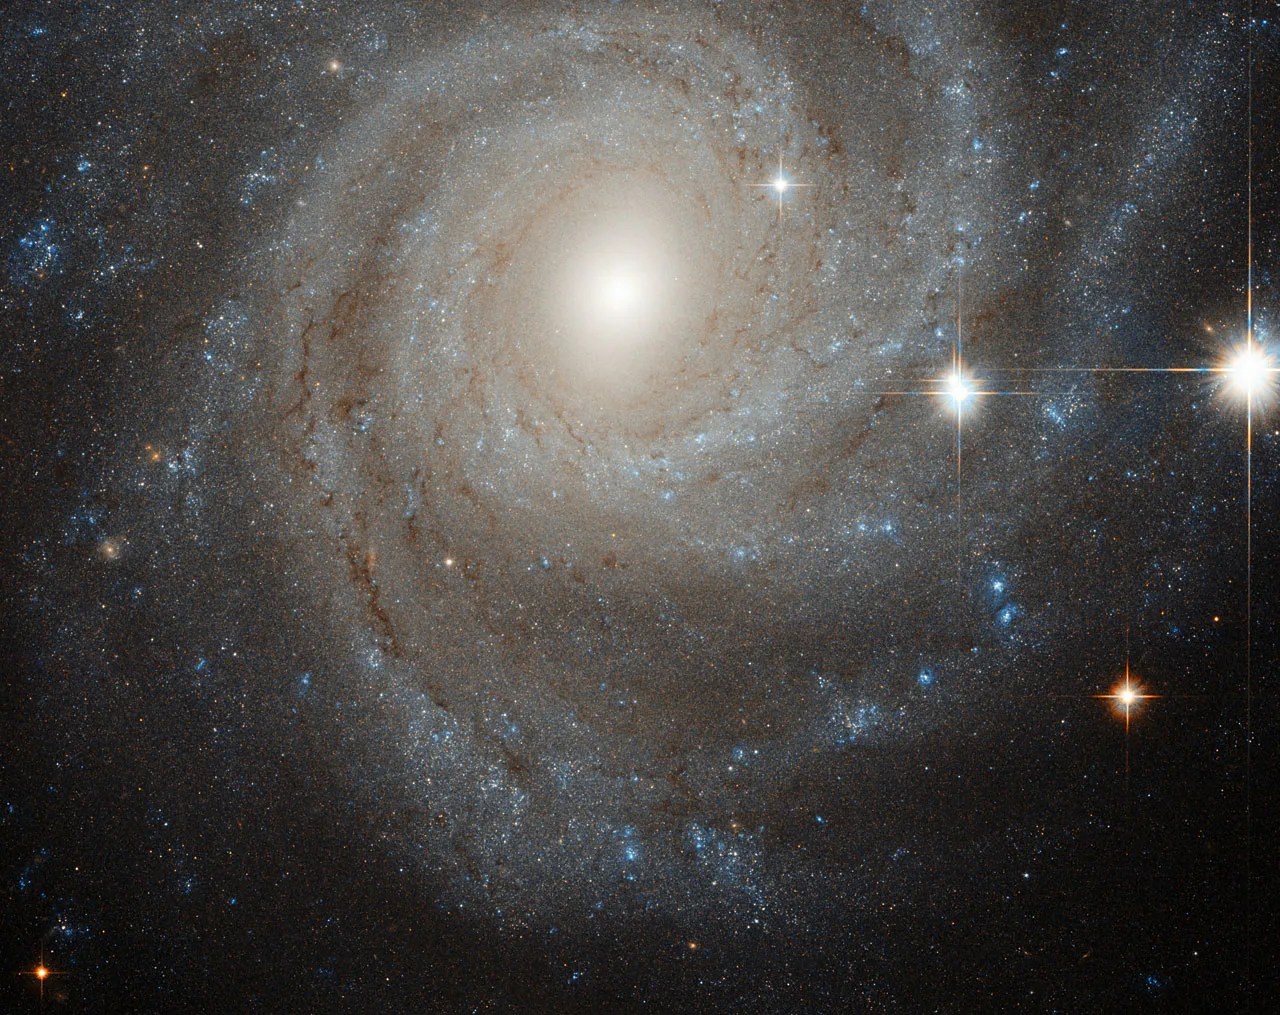 an off-center spiral galaxy, fringed by several nearby bright stars